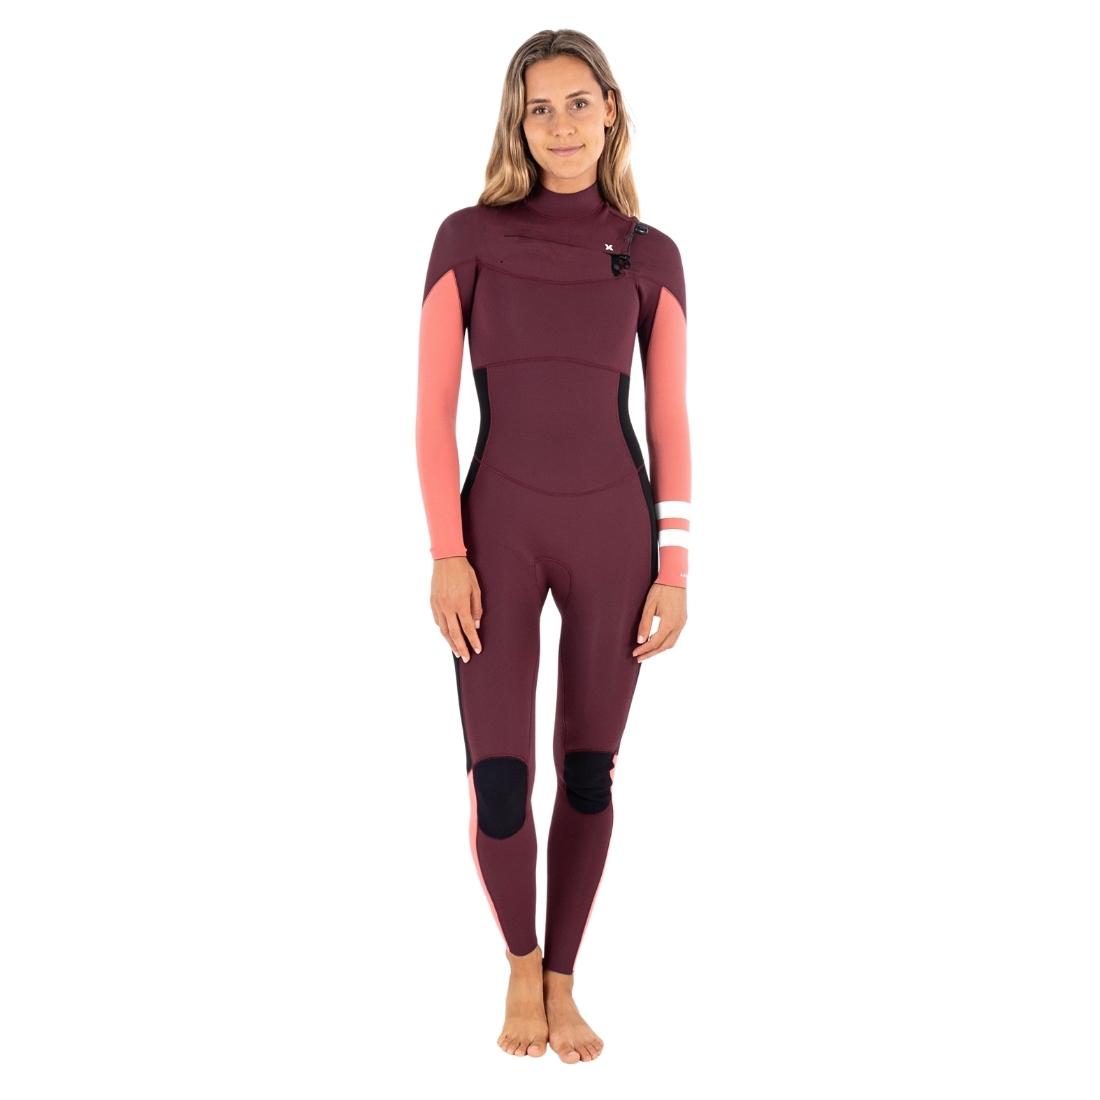 Hurley Womens Advantage 3/2mm Wetsuit - Winetesting - Womens Full Length Wetsuit by Hurley